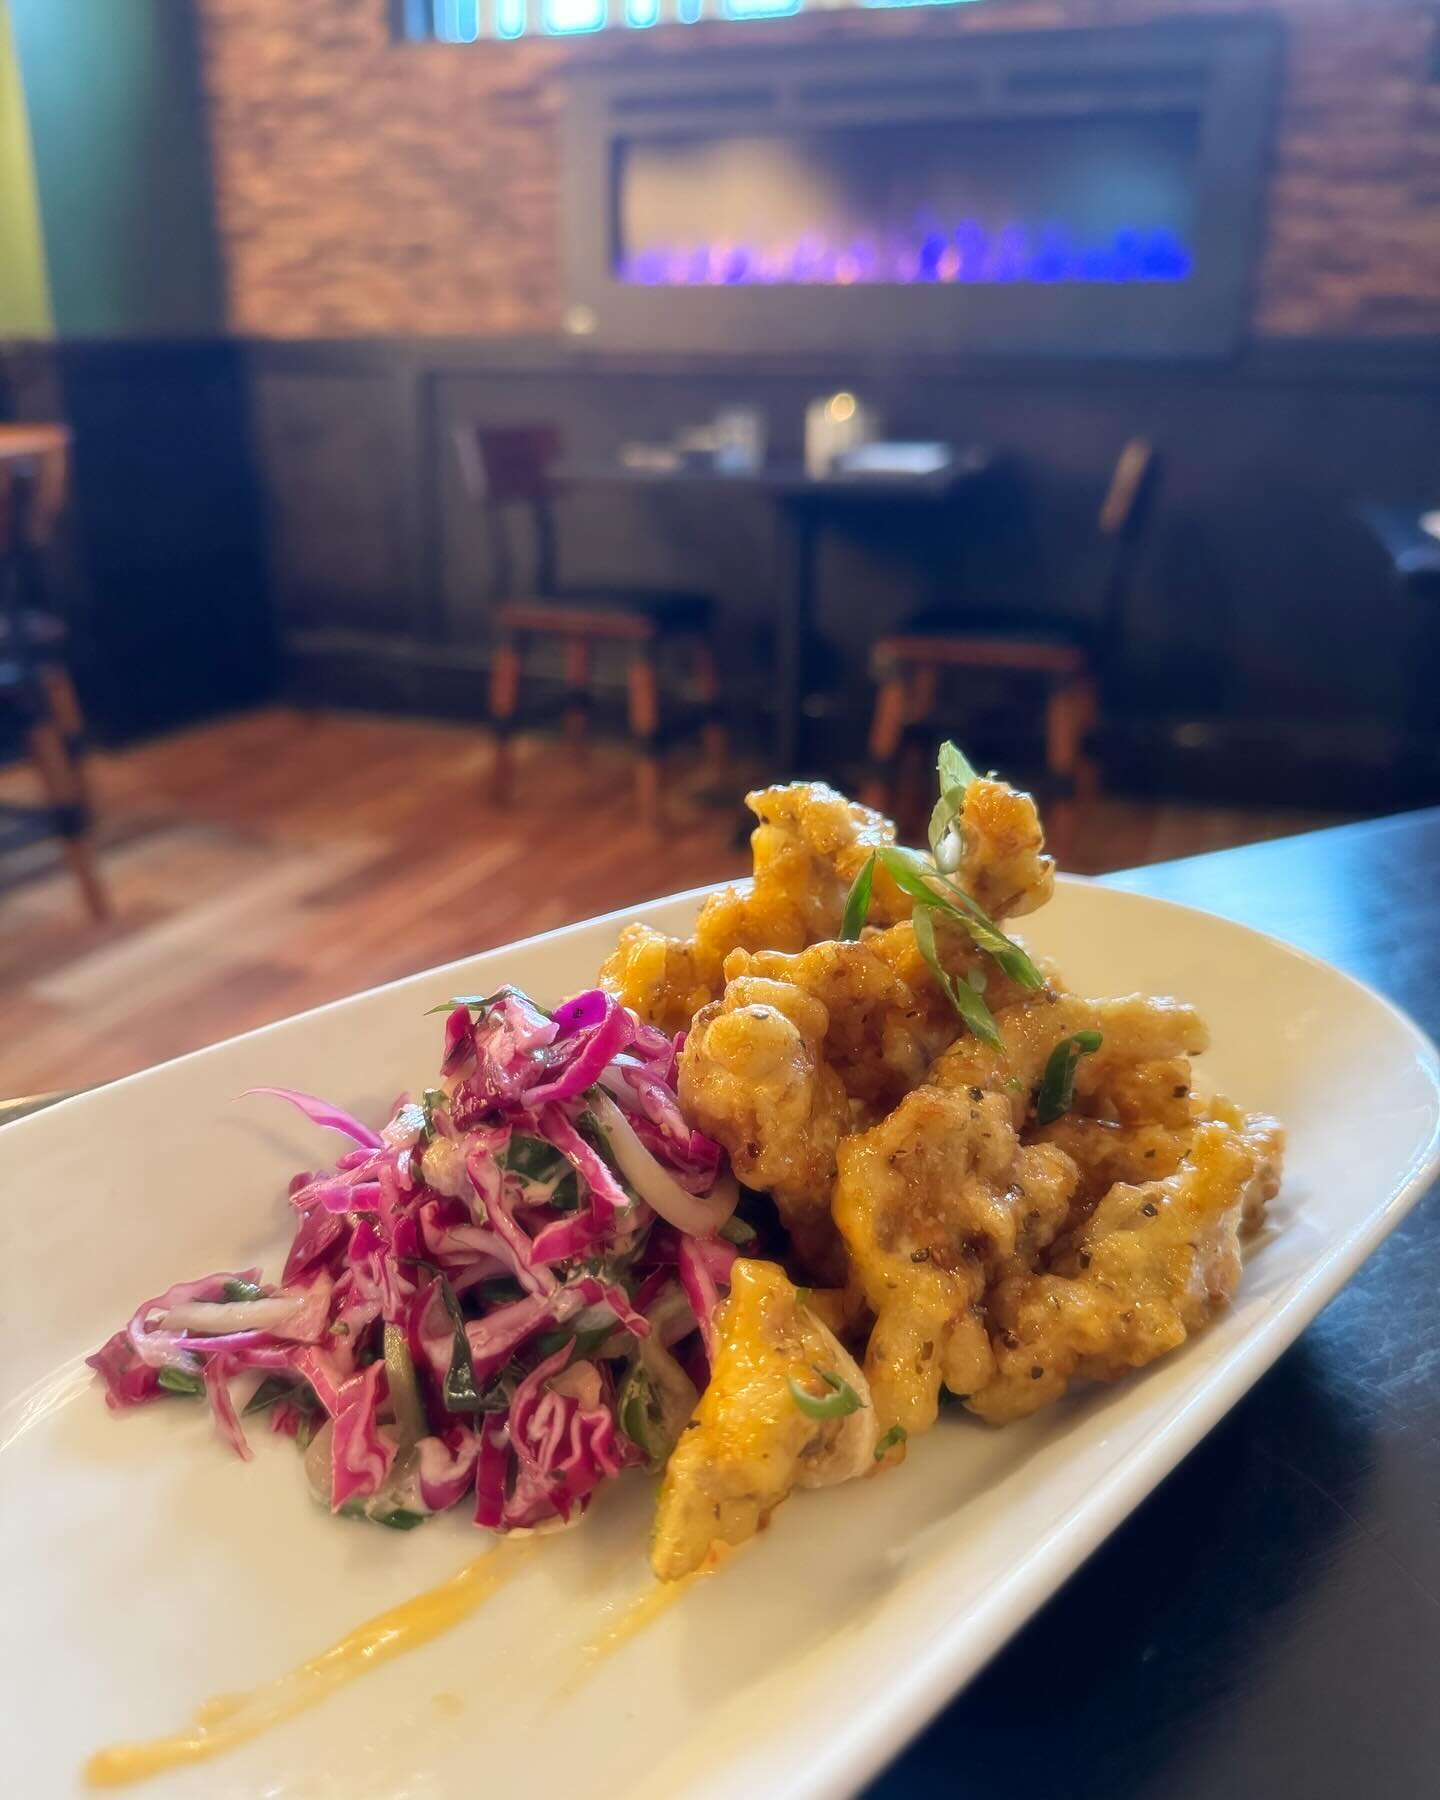 Cozy up by the fire and enjoy one of this week&rsquo;s Specials!
📸 Bang Bang Oyster Mushrooms 
🧑&zwj;🍳 @chef.mmontini 

**
**
**
**
**
**
**
#nicoles #nicolesrestaurant #special #specials #weeklyspecials #italian #italianrestaurant #albany #albany